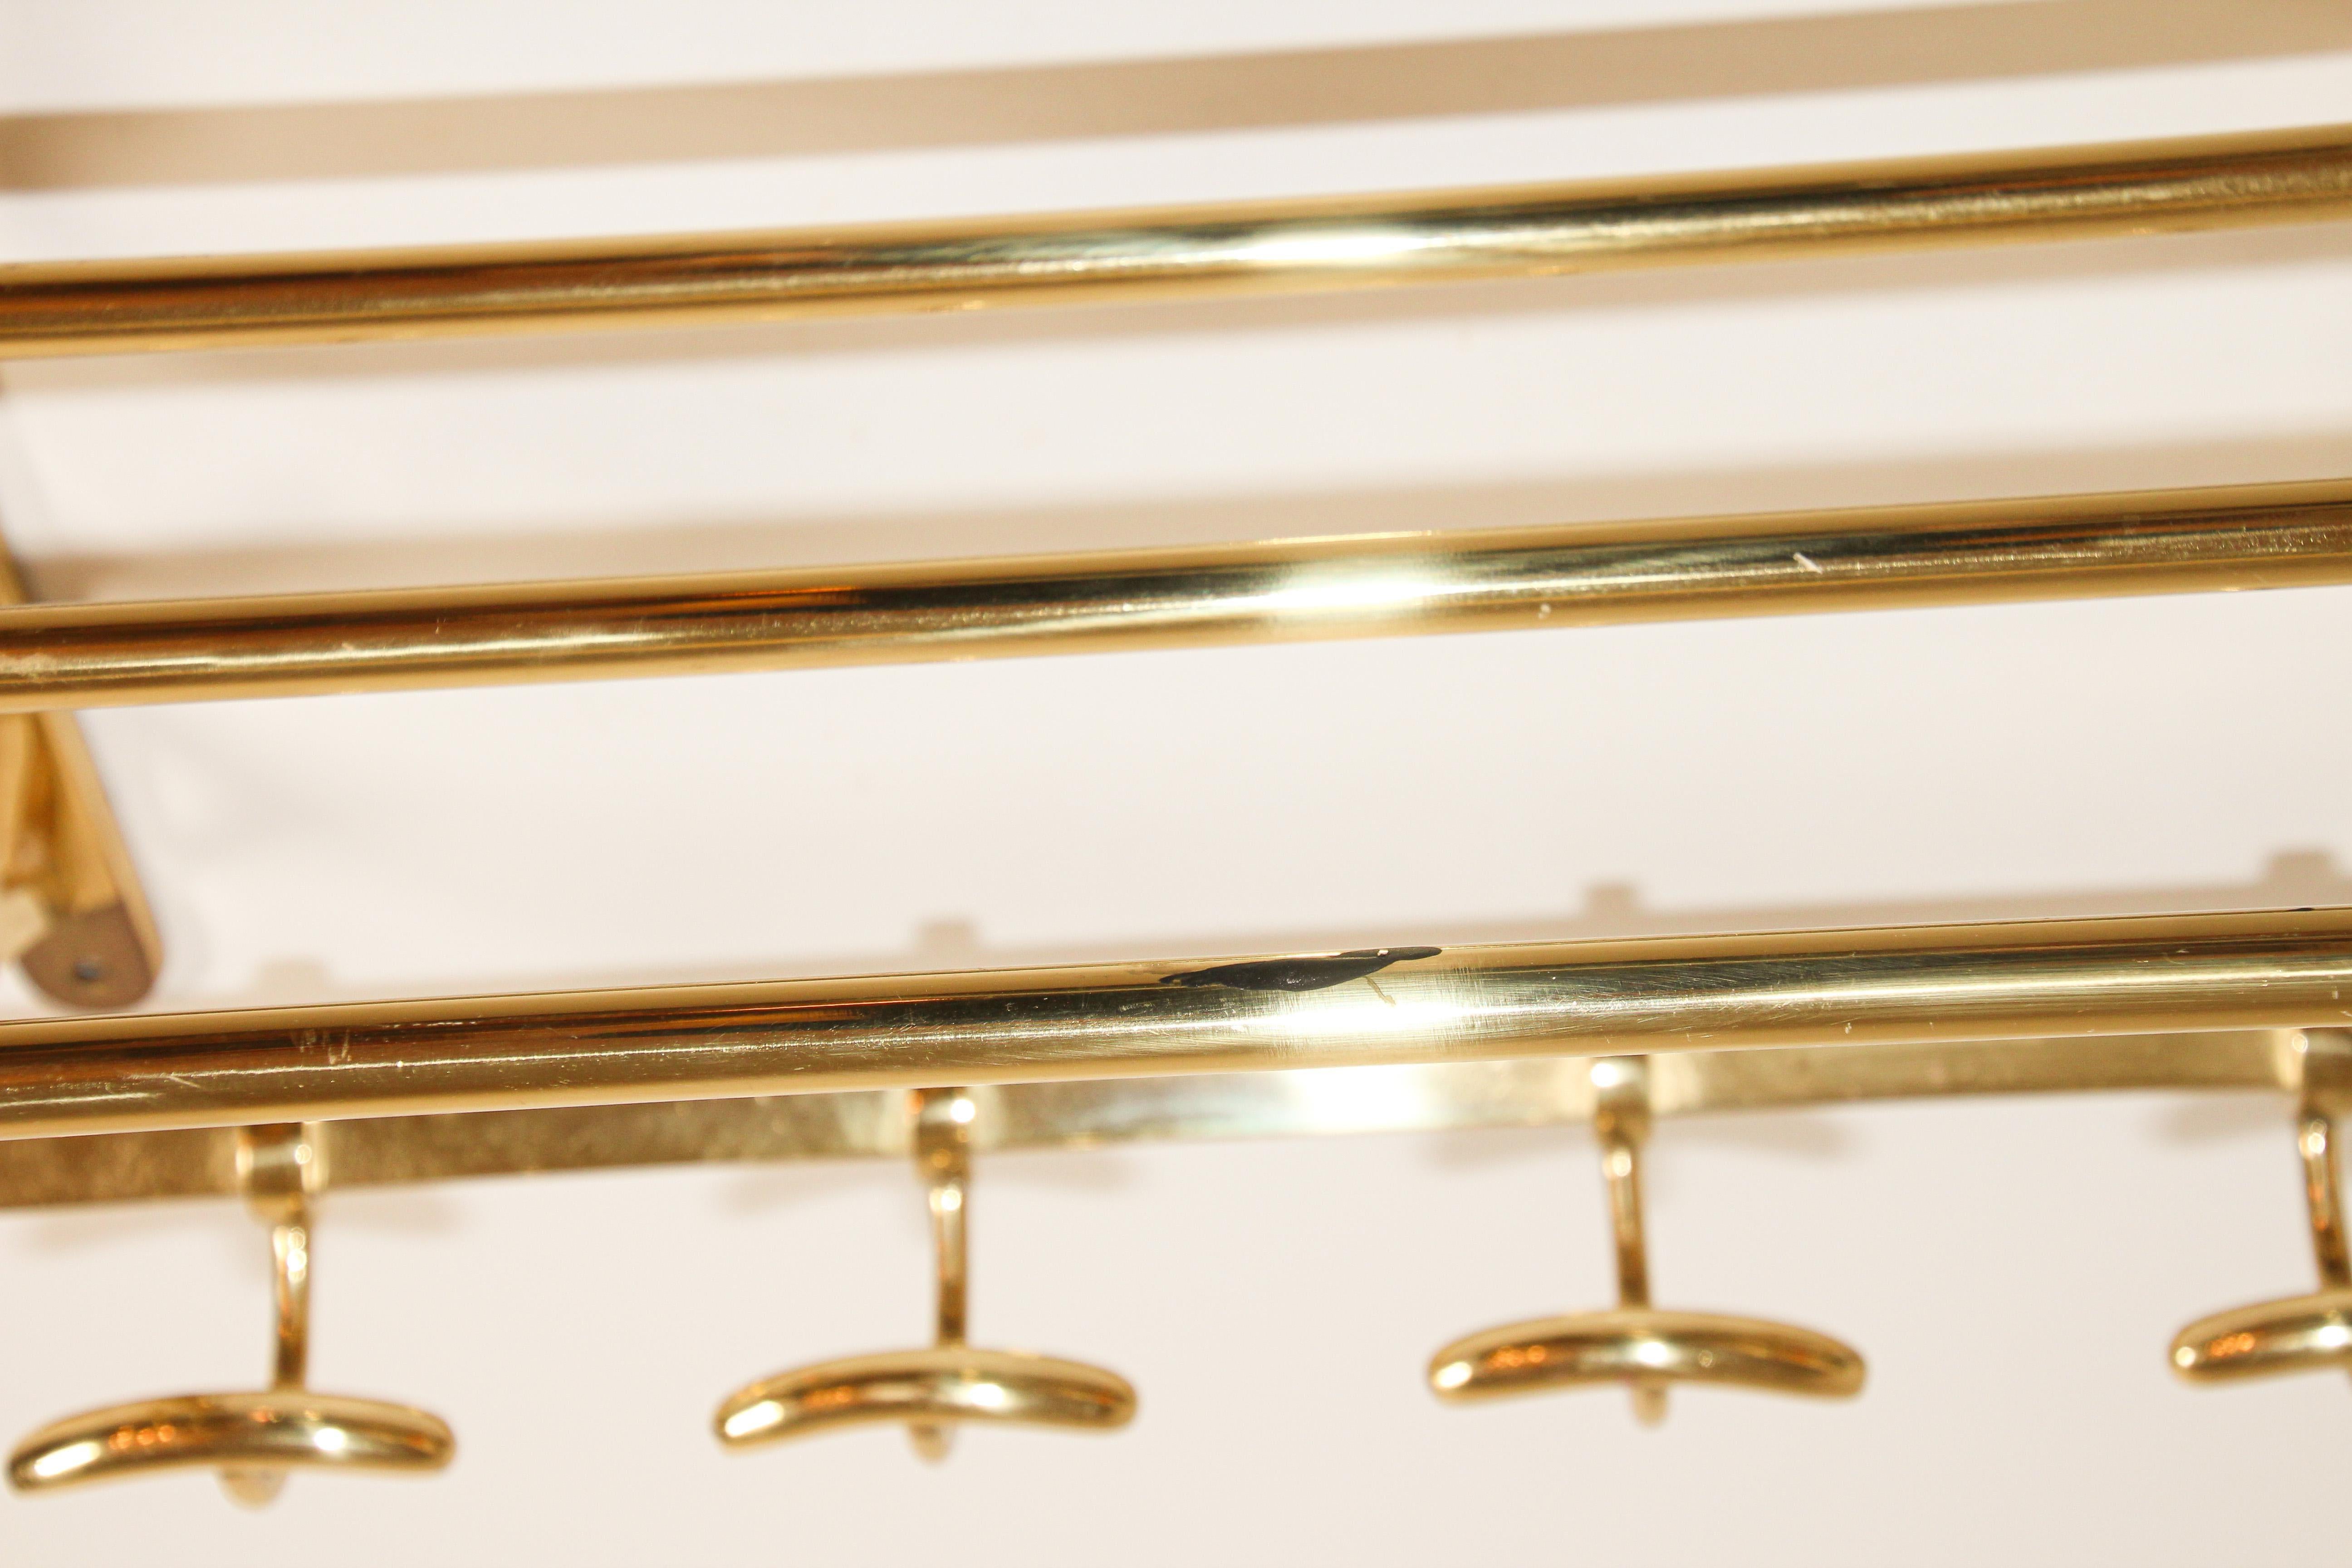 20th Century Vintage Brass Coat Rack with Shelf and Hooks